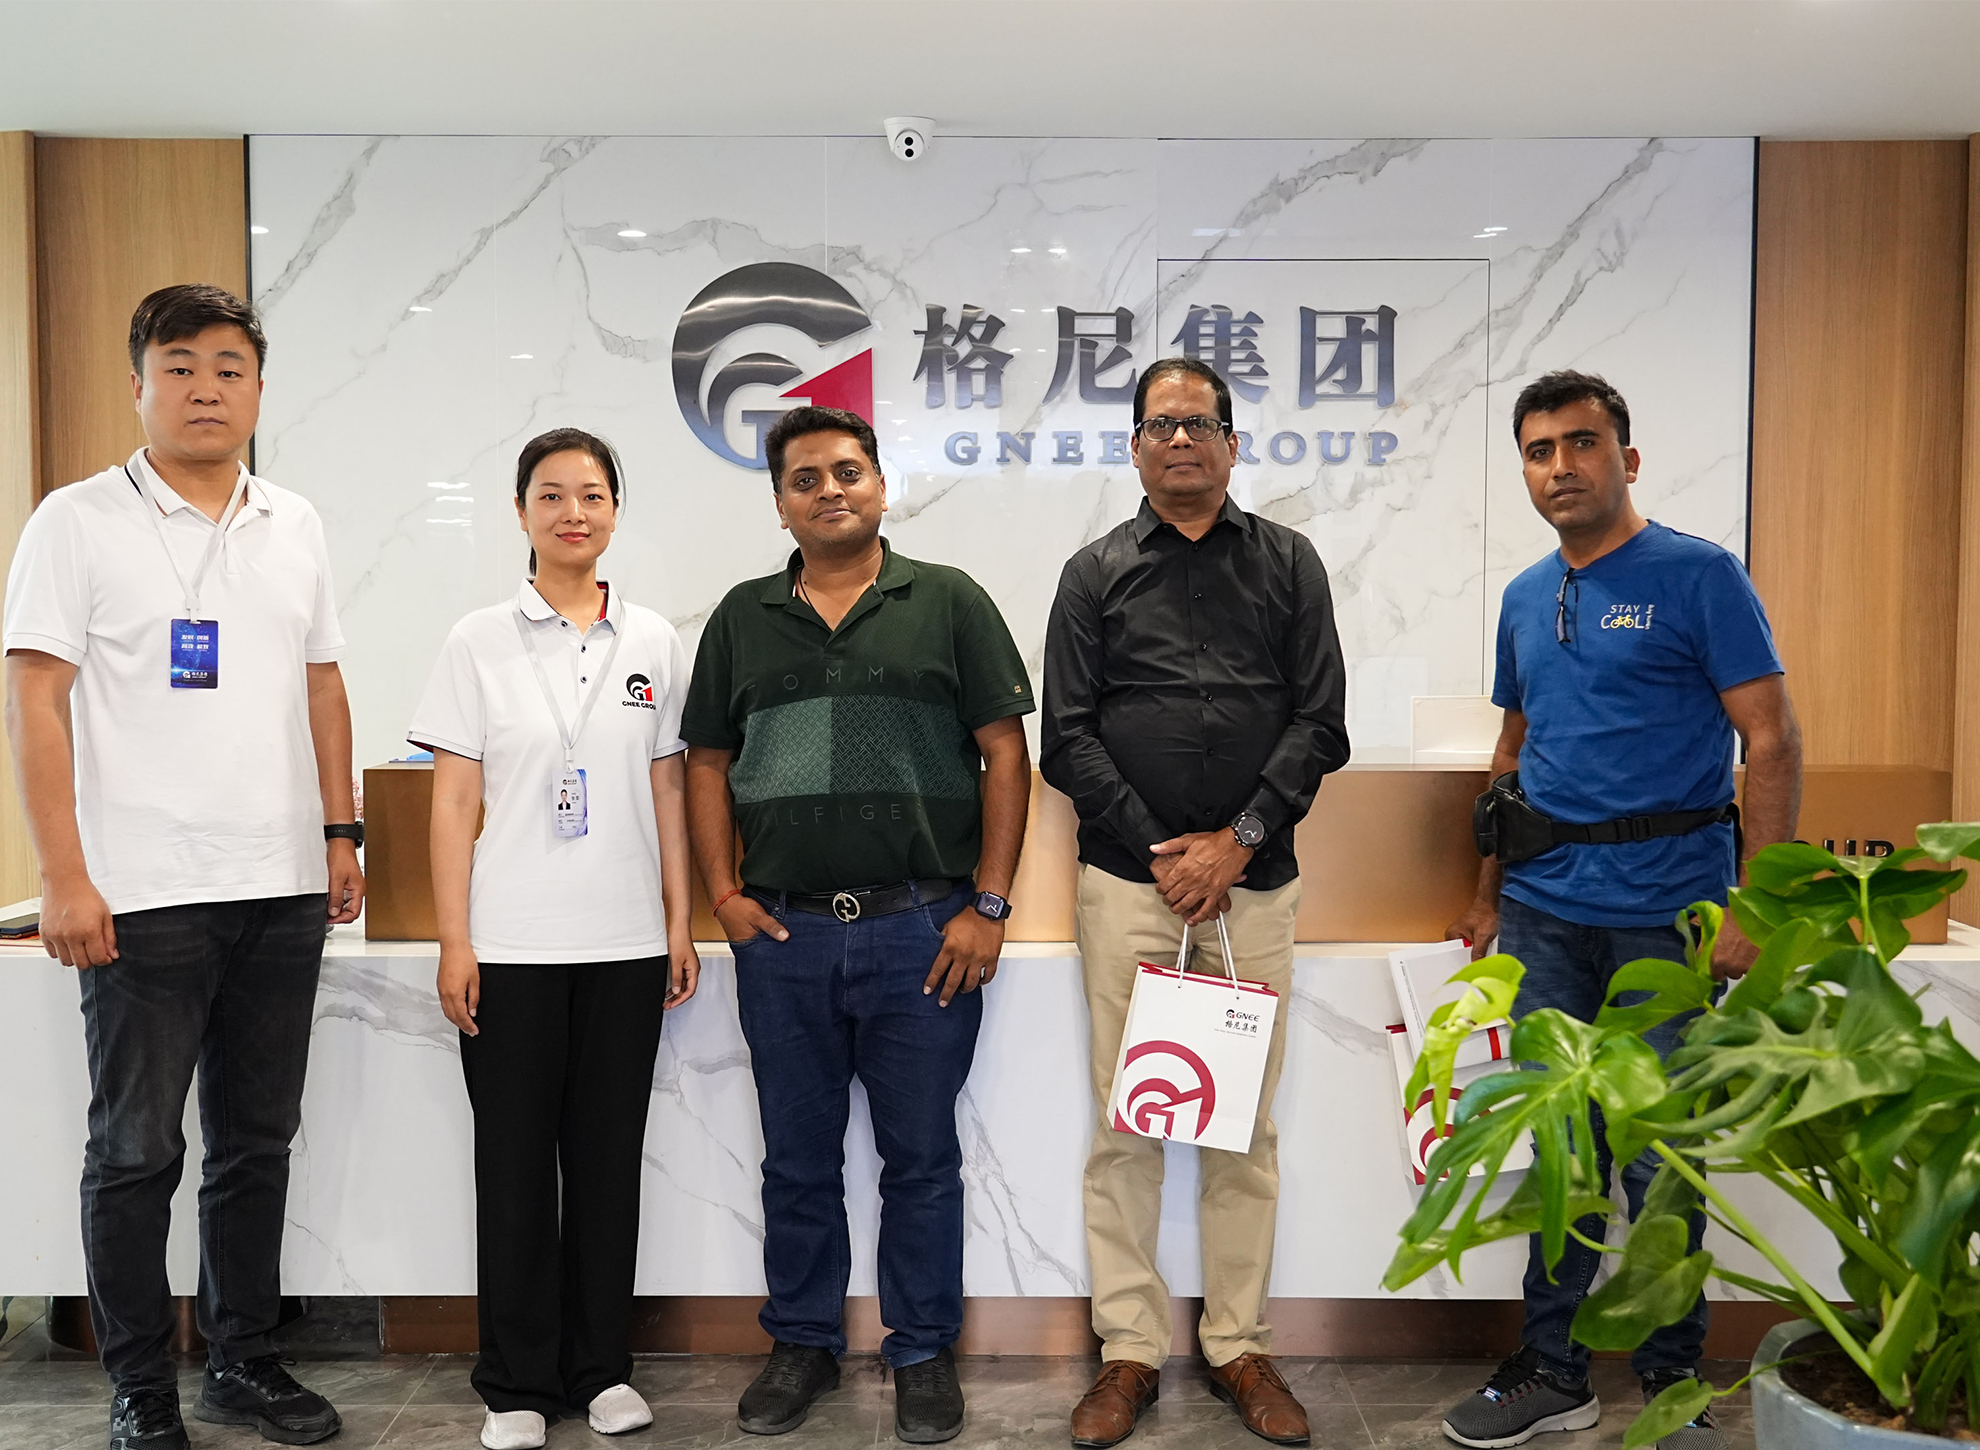 On May 11, GNEE STEEL warmly welcomed the arrival of stainless steel manufacturers from India